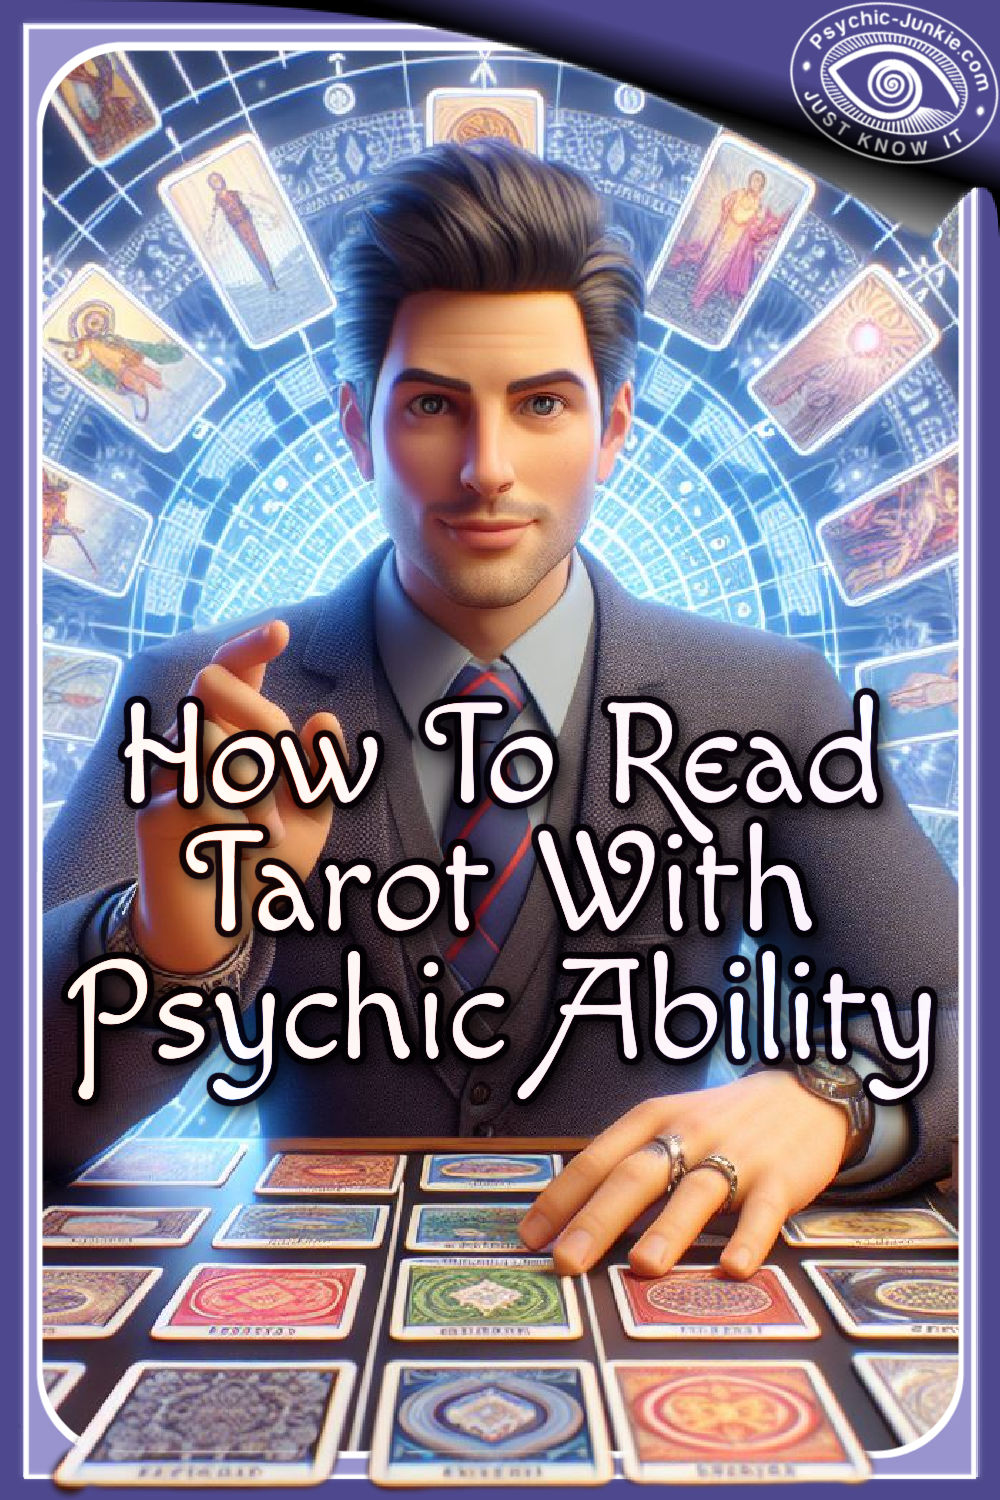 What Is Tarot Card Reading Using Intuition?